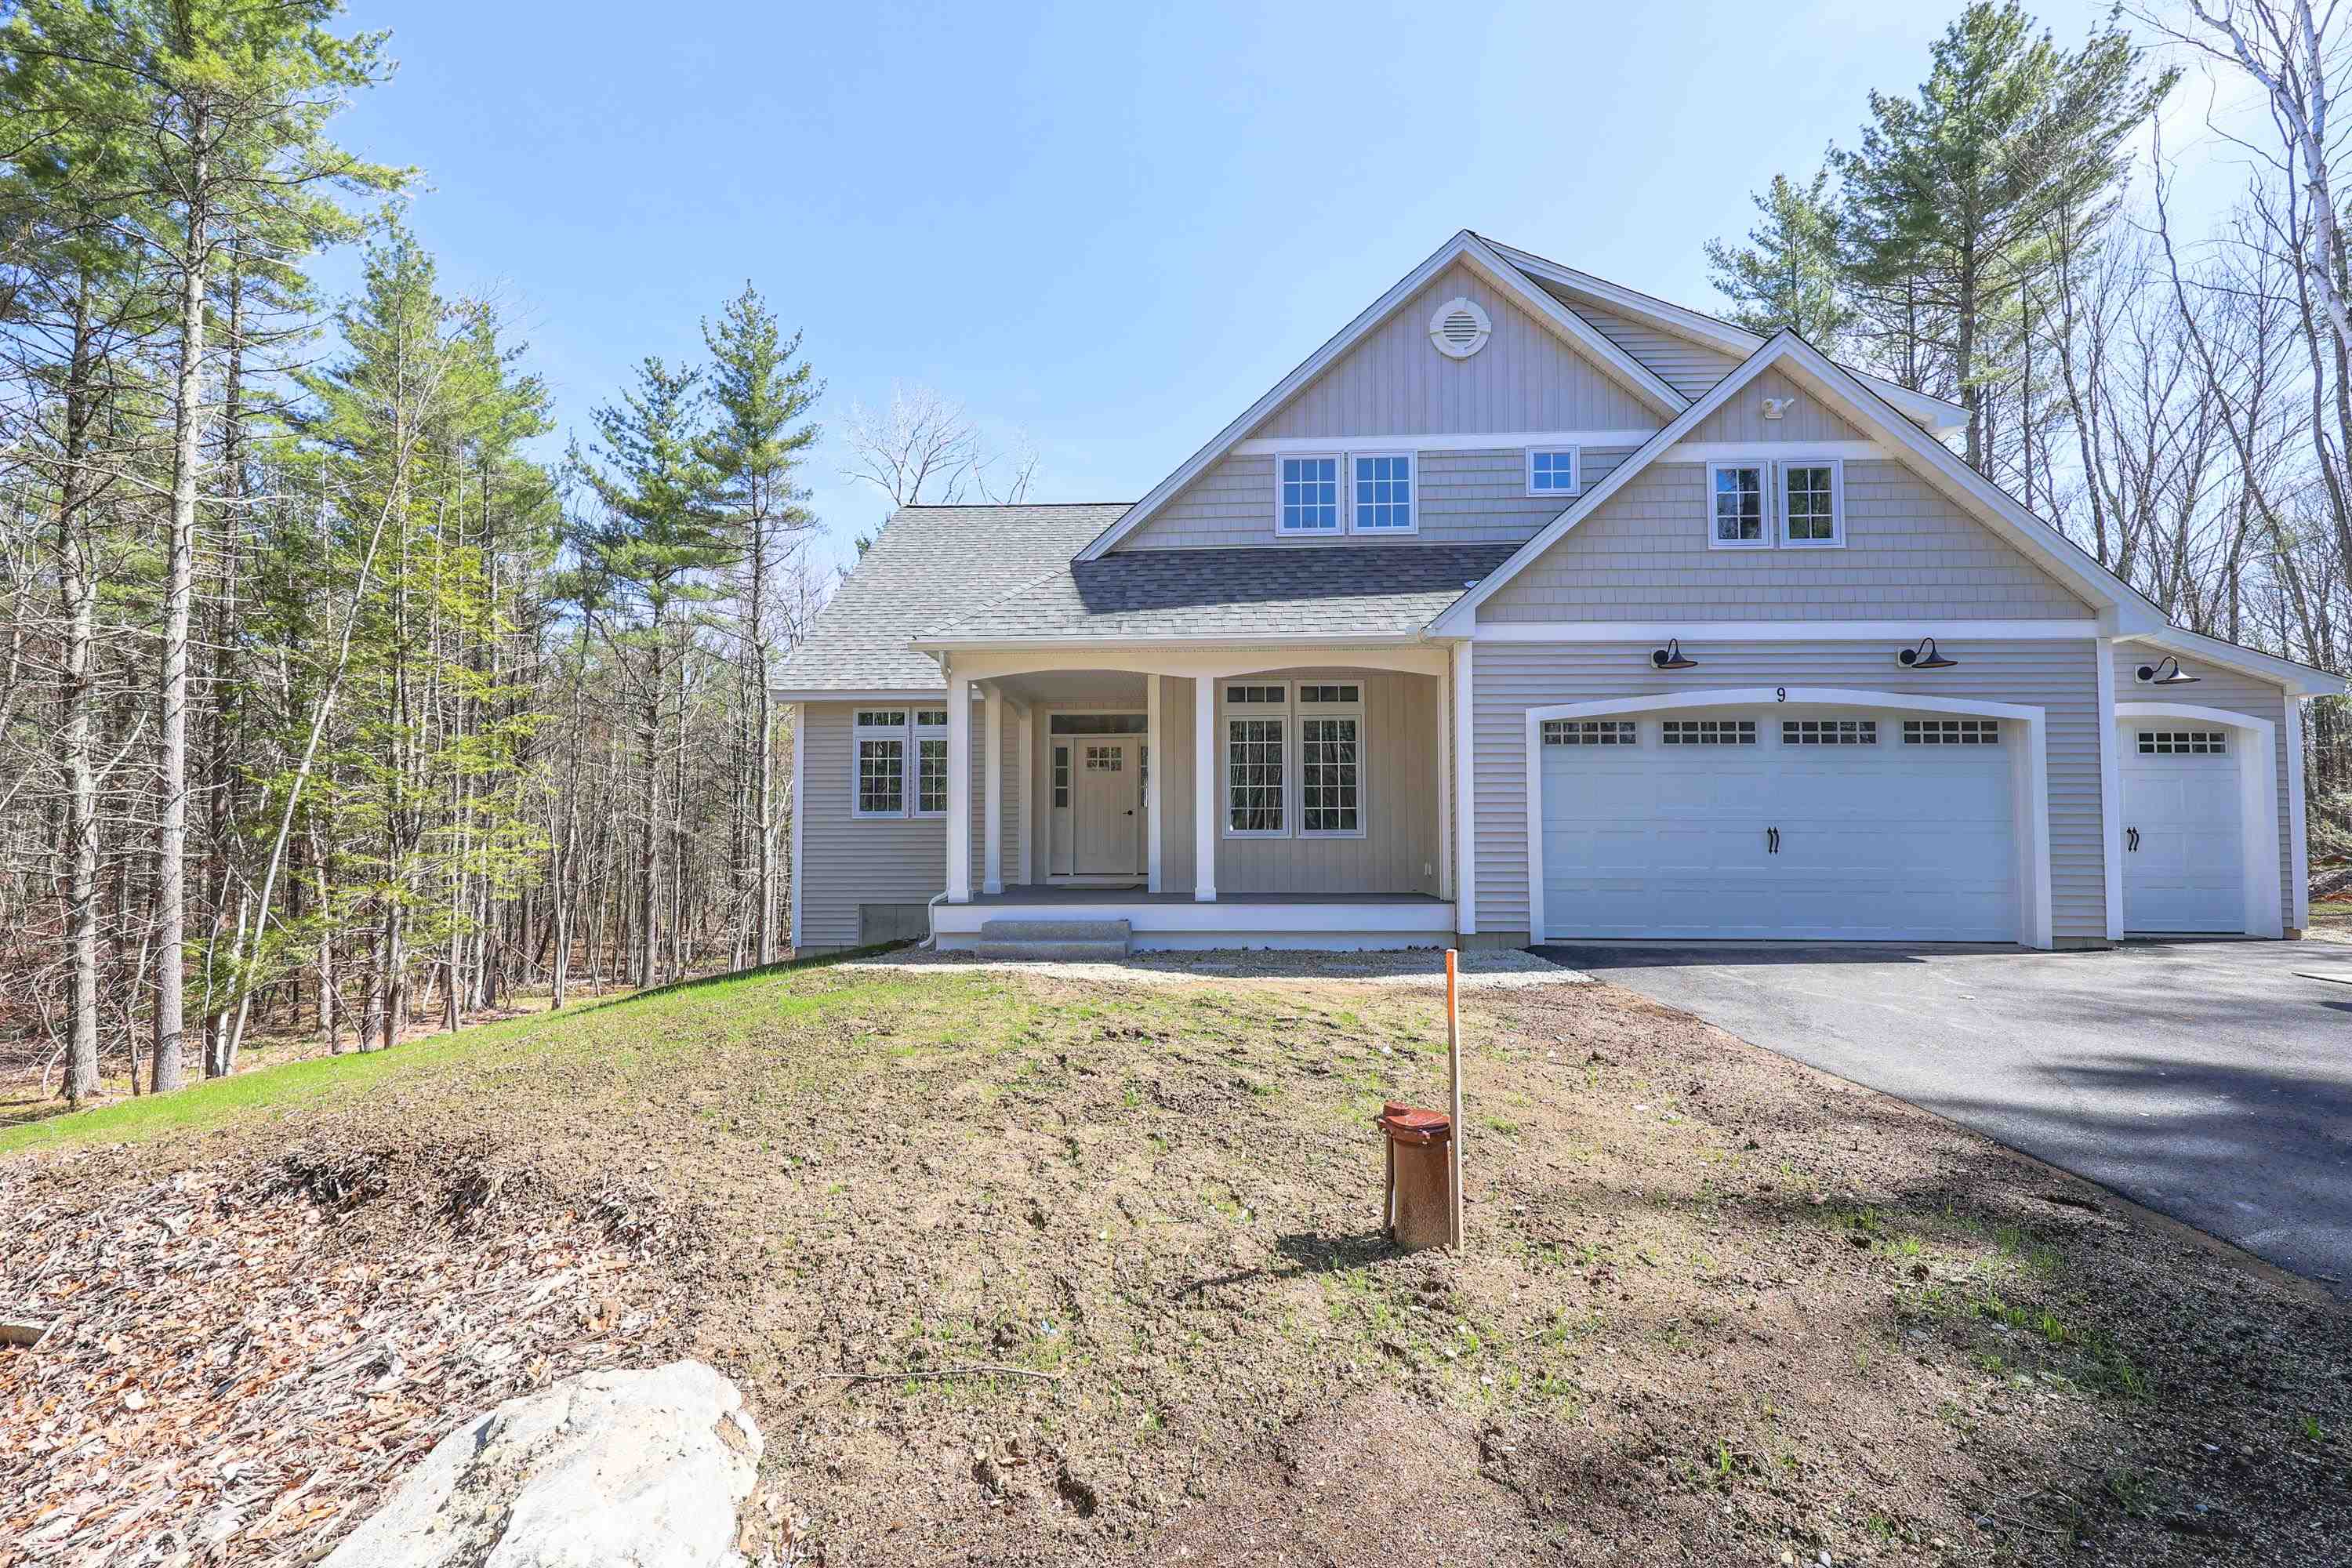 11 Hayden Drive Lot 12 - The Hannah, Dover, NH 03820